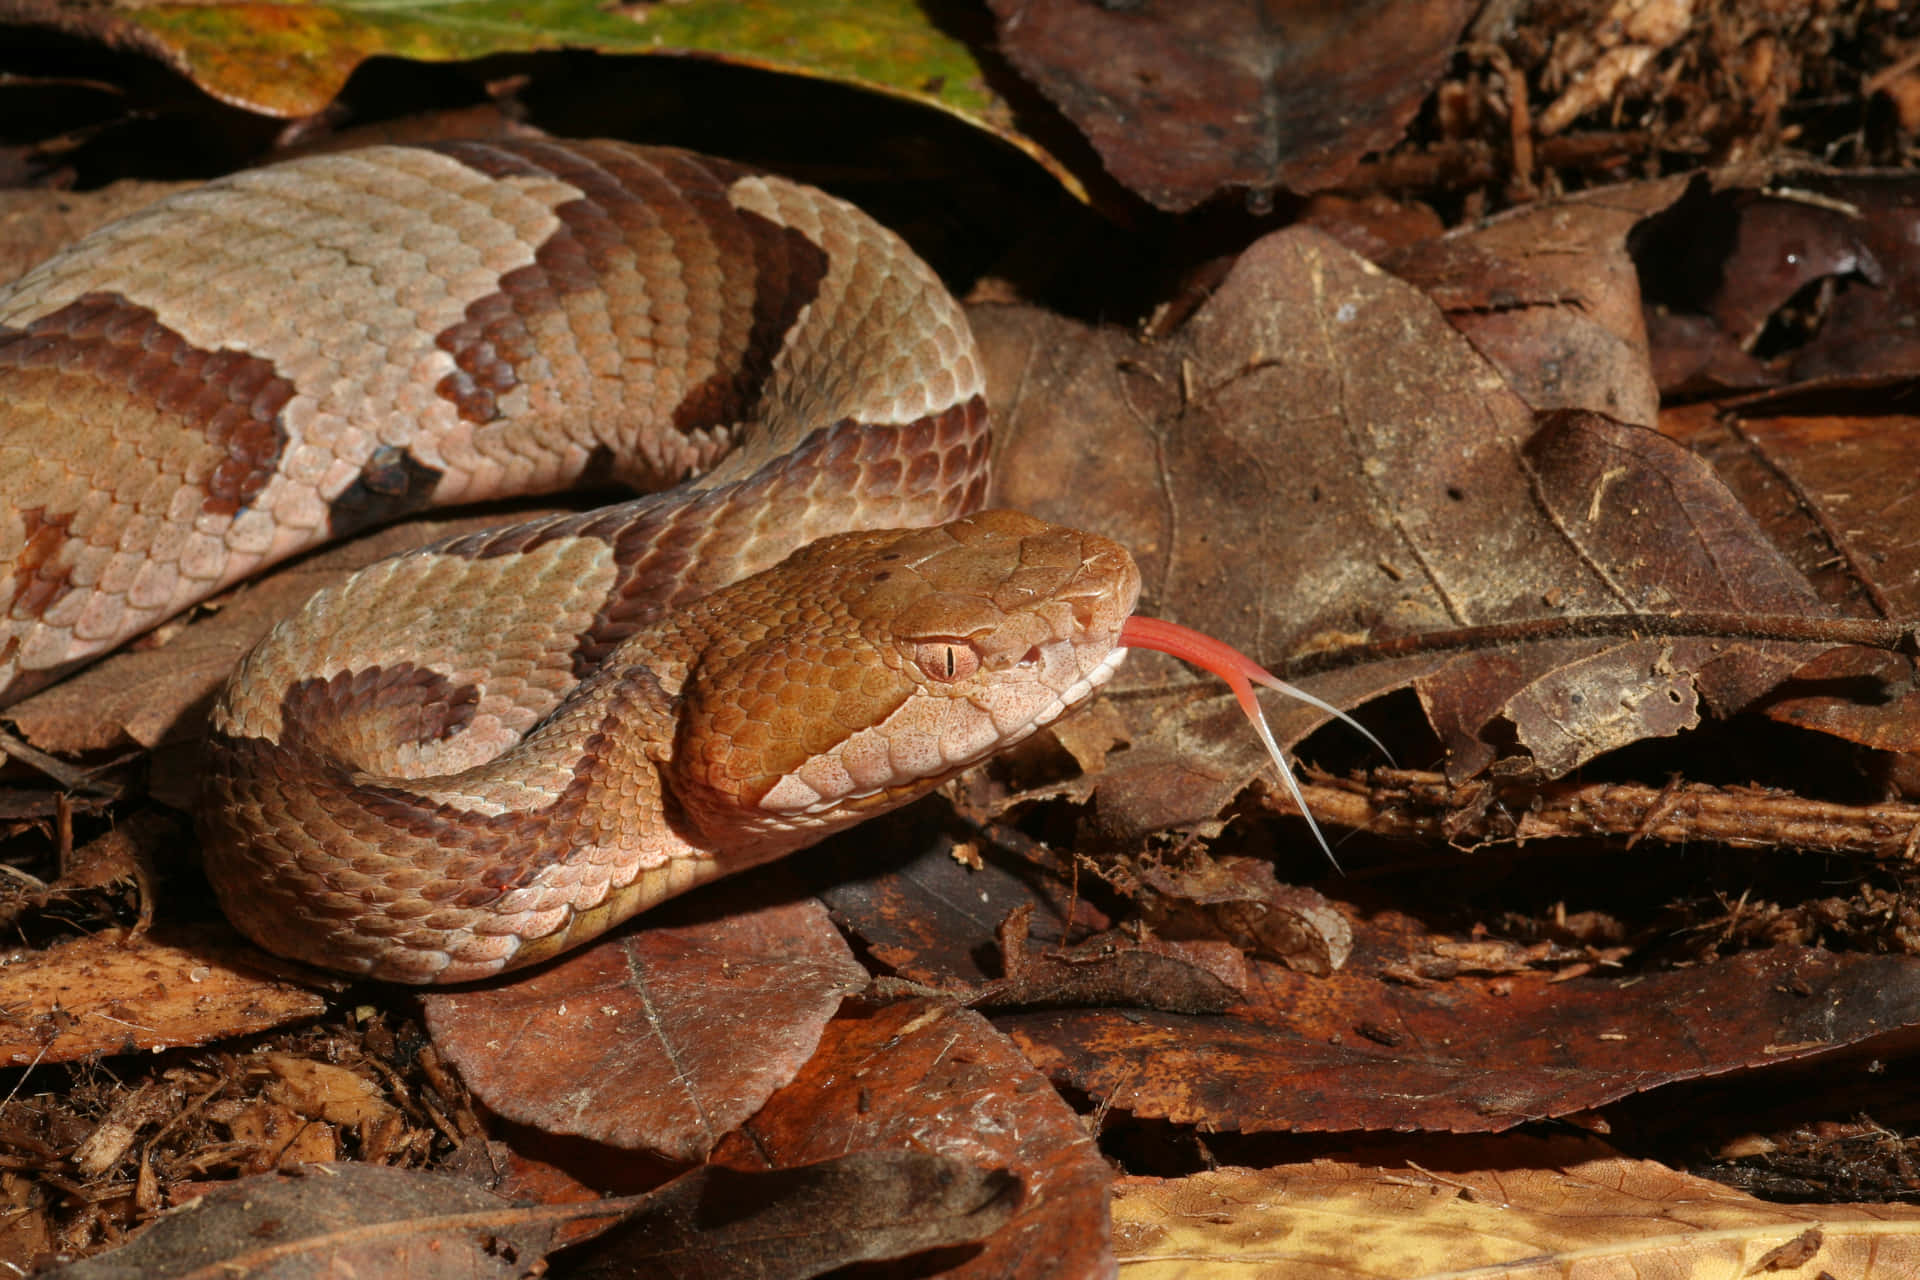 This Copperhead Snake is ready to strike